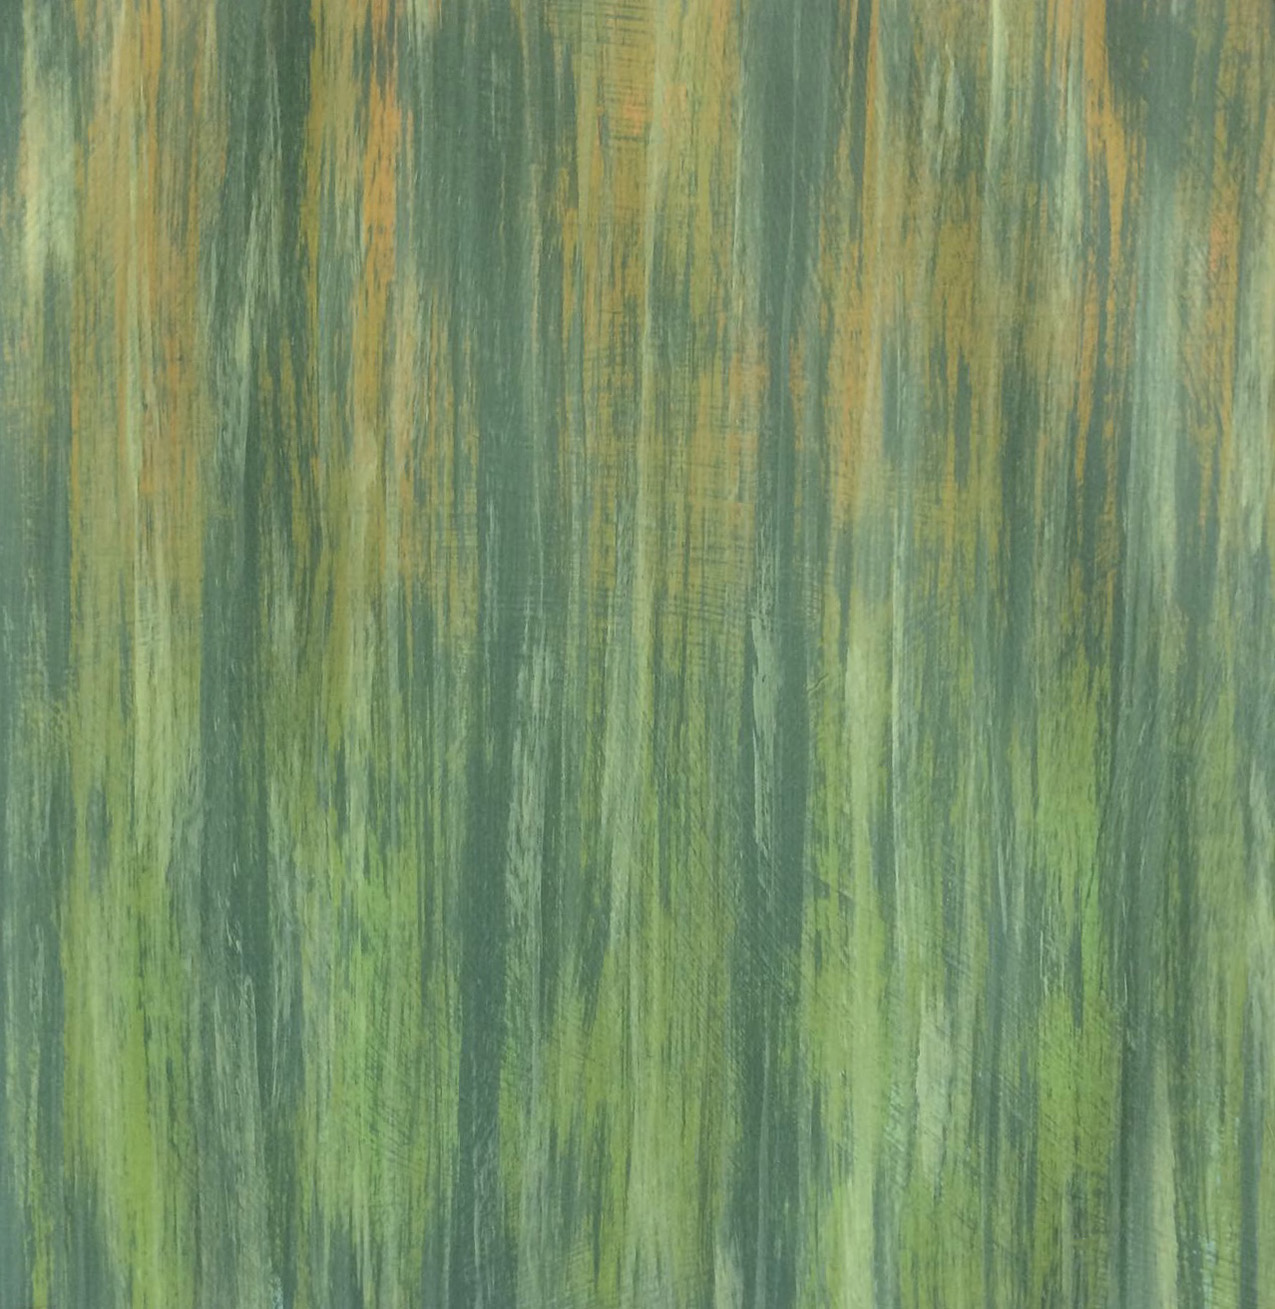 abstract painting of vertical brush strokes in various shades of green